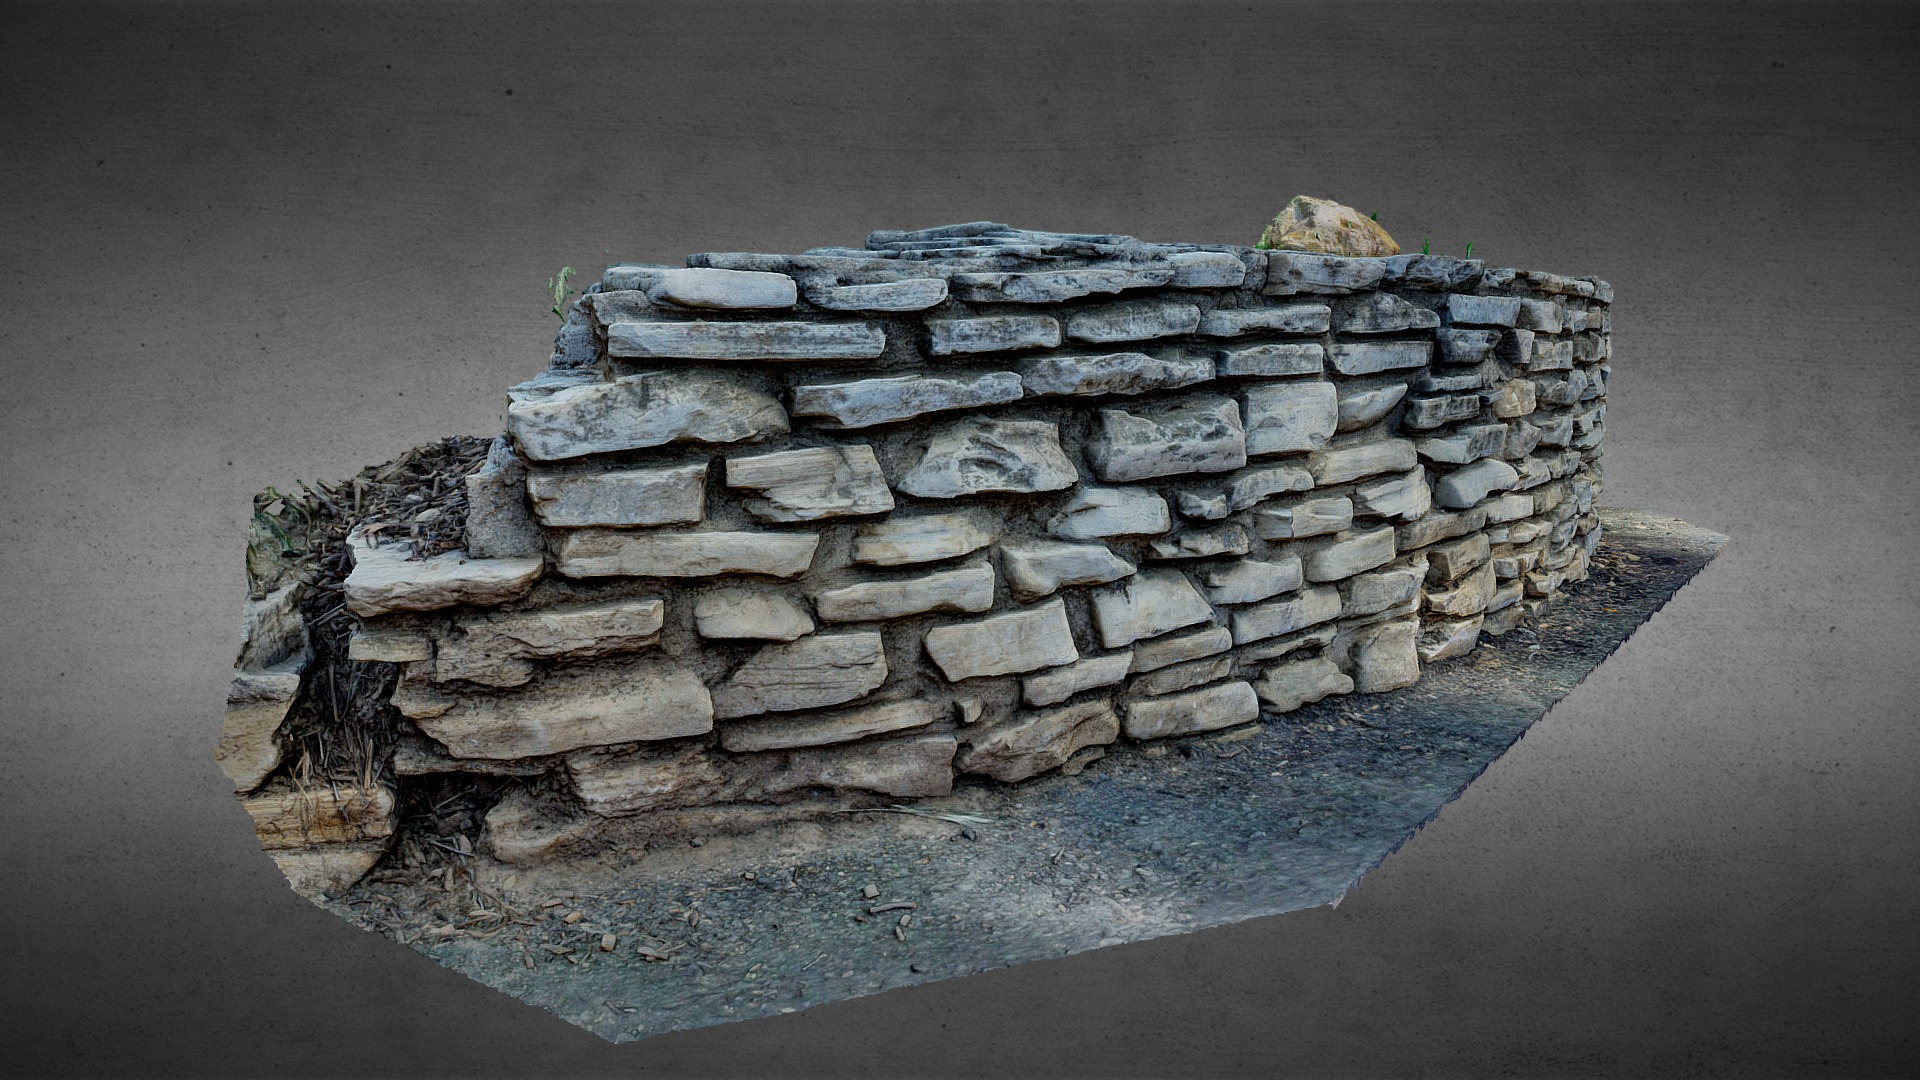 3D model 3D Scan – Rough Stone Wall - This is a 3D model of the 3D Scan - Rough Stone Wall. The 3D model is about a stone wall with a stone walkway.